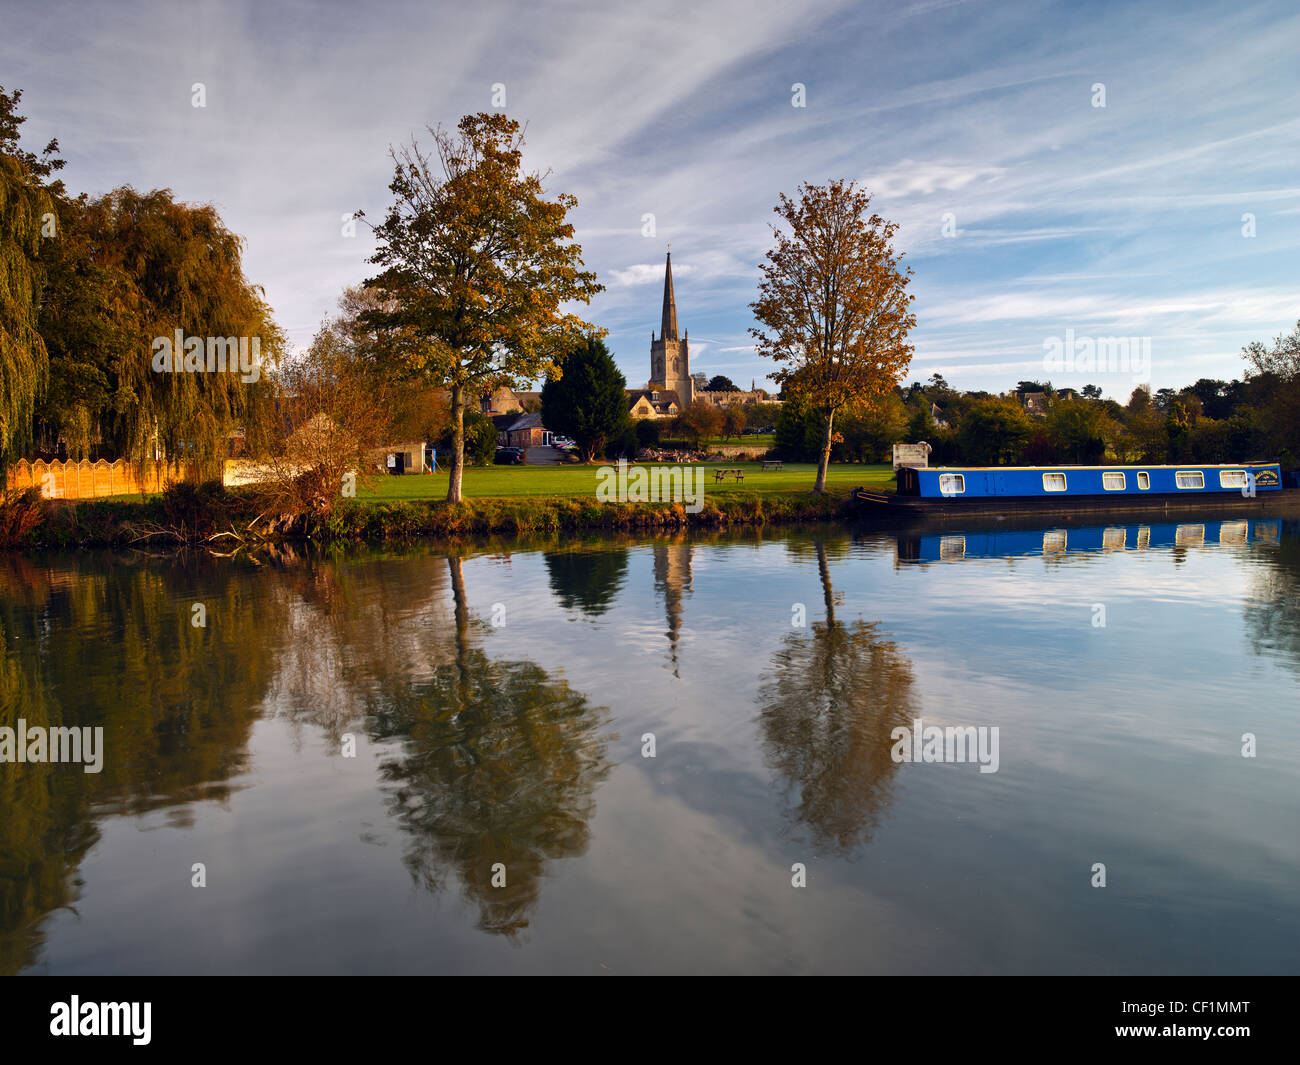 A narrow boat moored on the River Thames at Lechlade with St Lawrence church in the background. Stock Photo